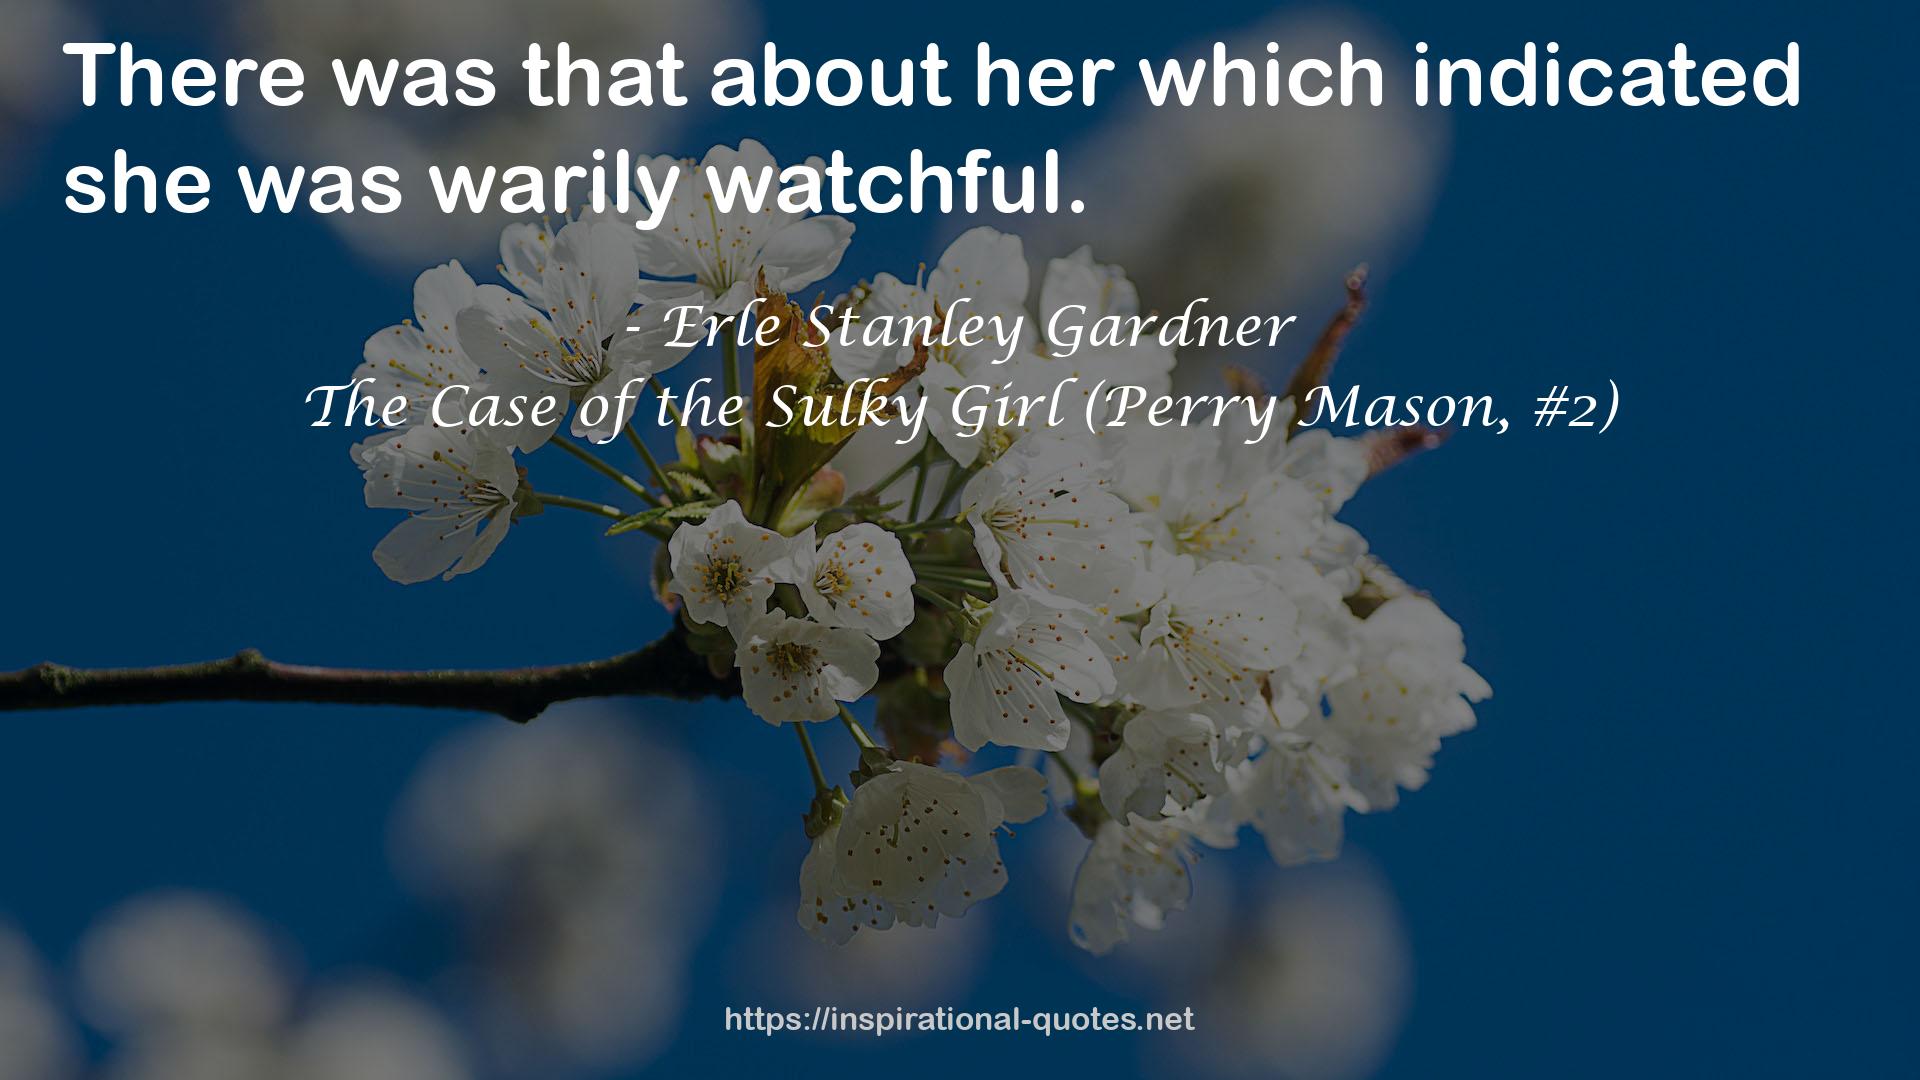 The Case of the Sulky Girl (Perry Mason, #2) QUOTES